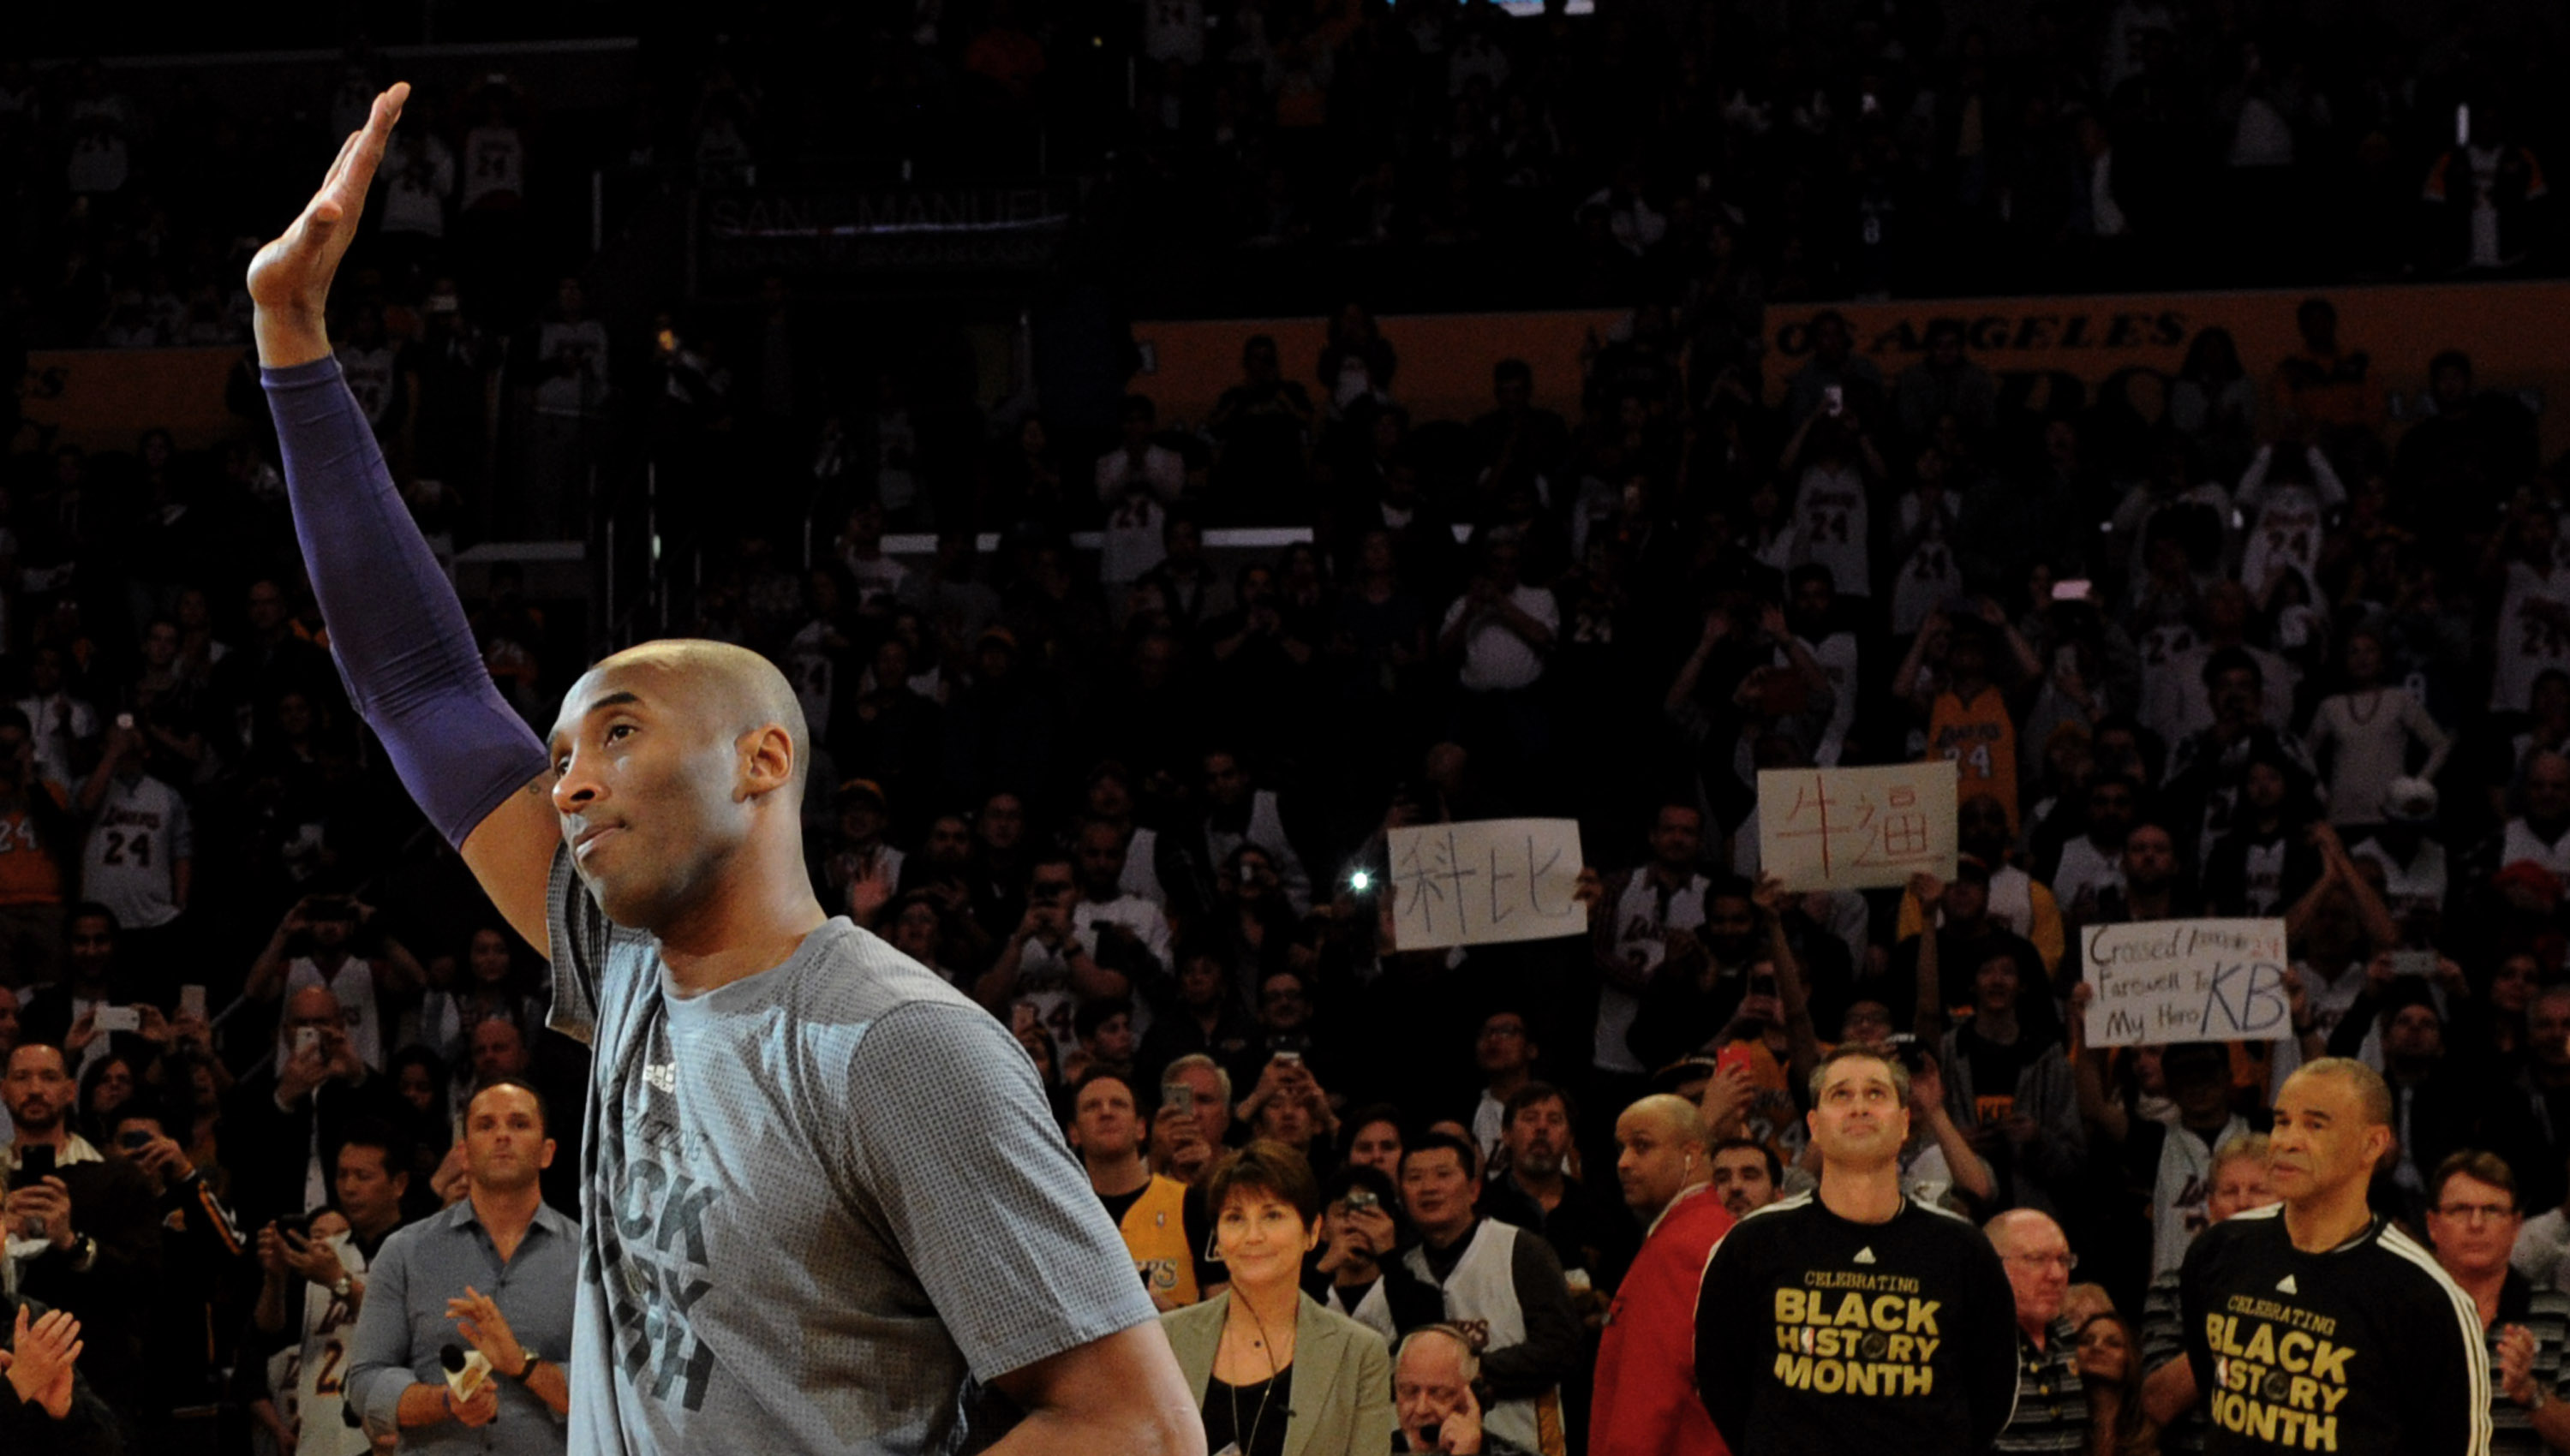 Los Angeles Lakers' Kobe Bryant waves to the crowd after receiving his Al-Star jersey prior to a NBA basketball game against the Minnesota Timberwolves at Staples Center on Tuesday, Feb. 2, 2015 in Los Angeles. (Photo by Keith Birmingham/ Pasadena Star-News)